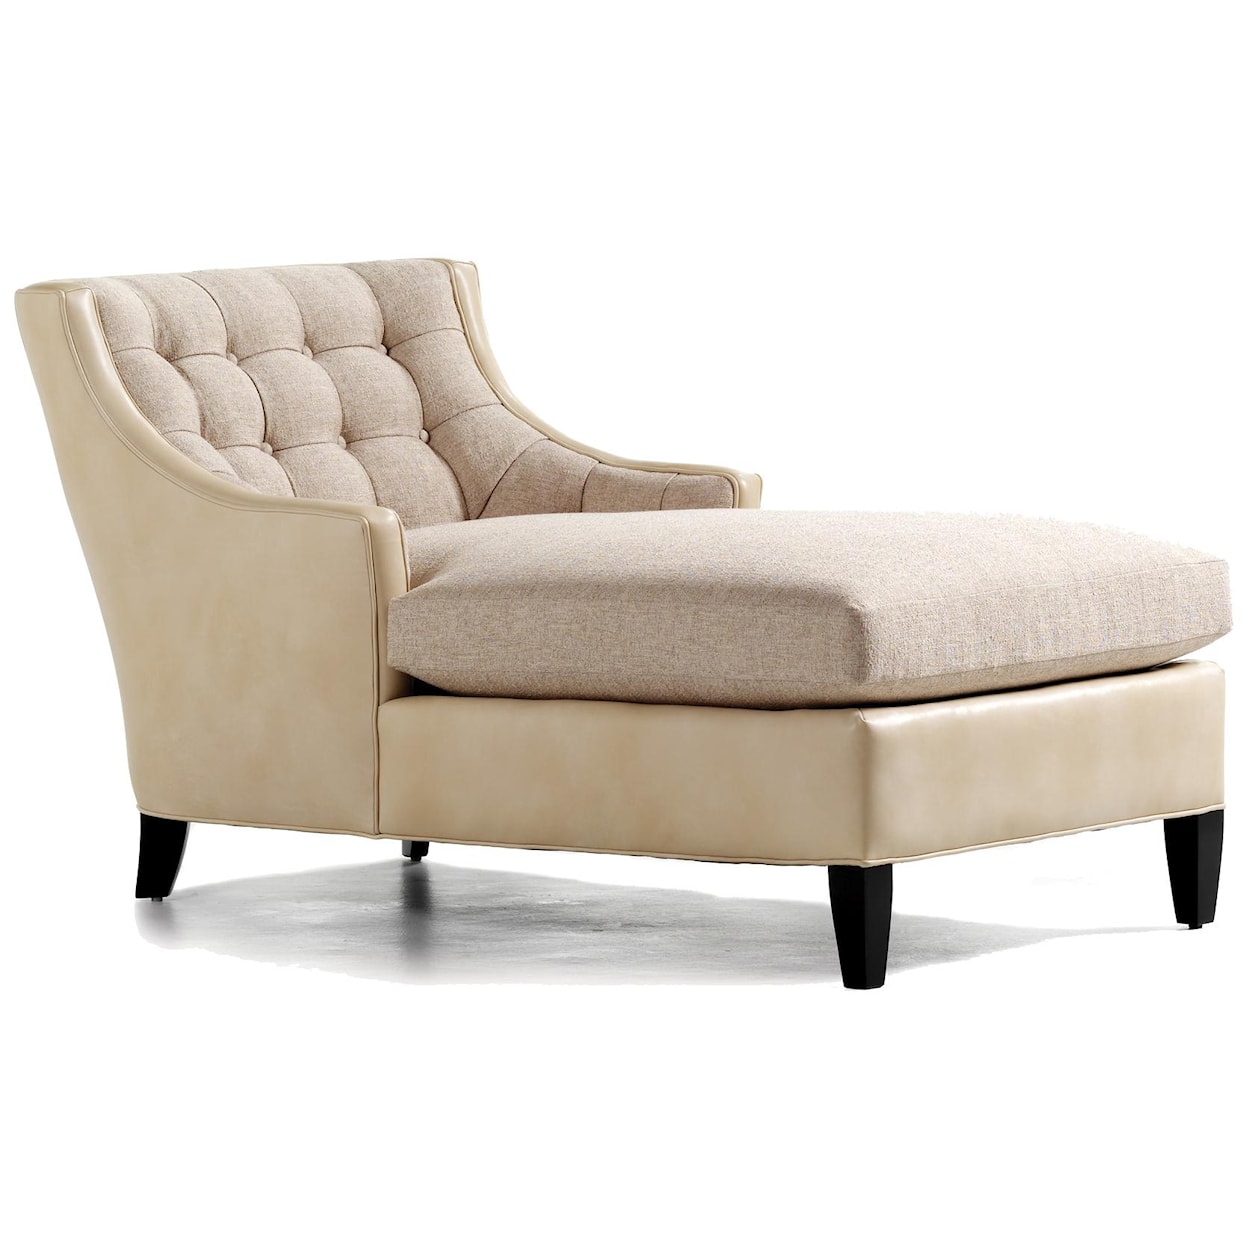 Jessica Charles Fine Upholstered Accents Deana Chaise   